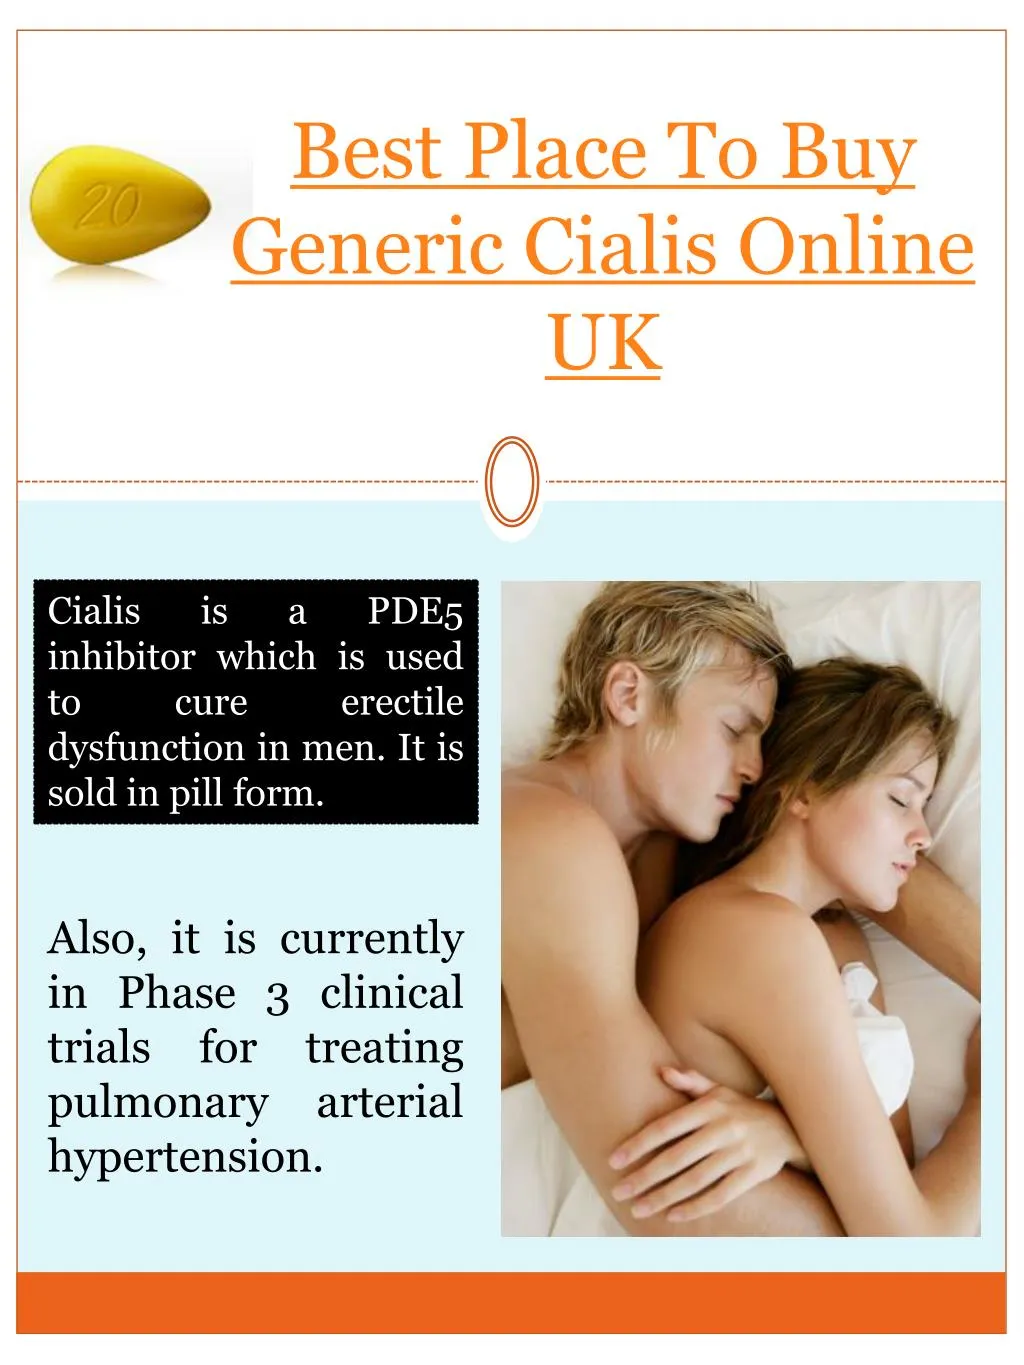 best place to buy generic cialis online uk